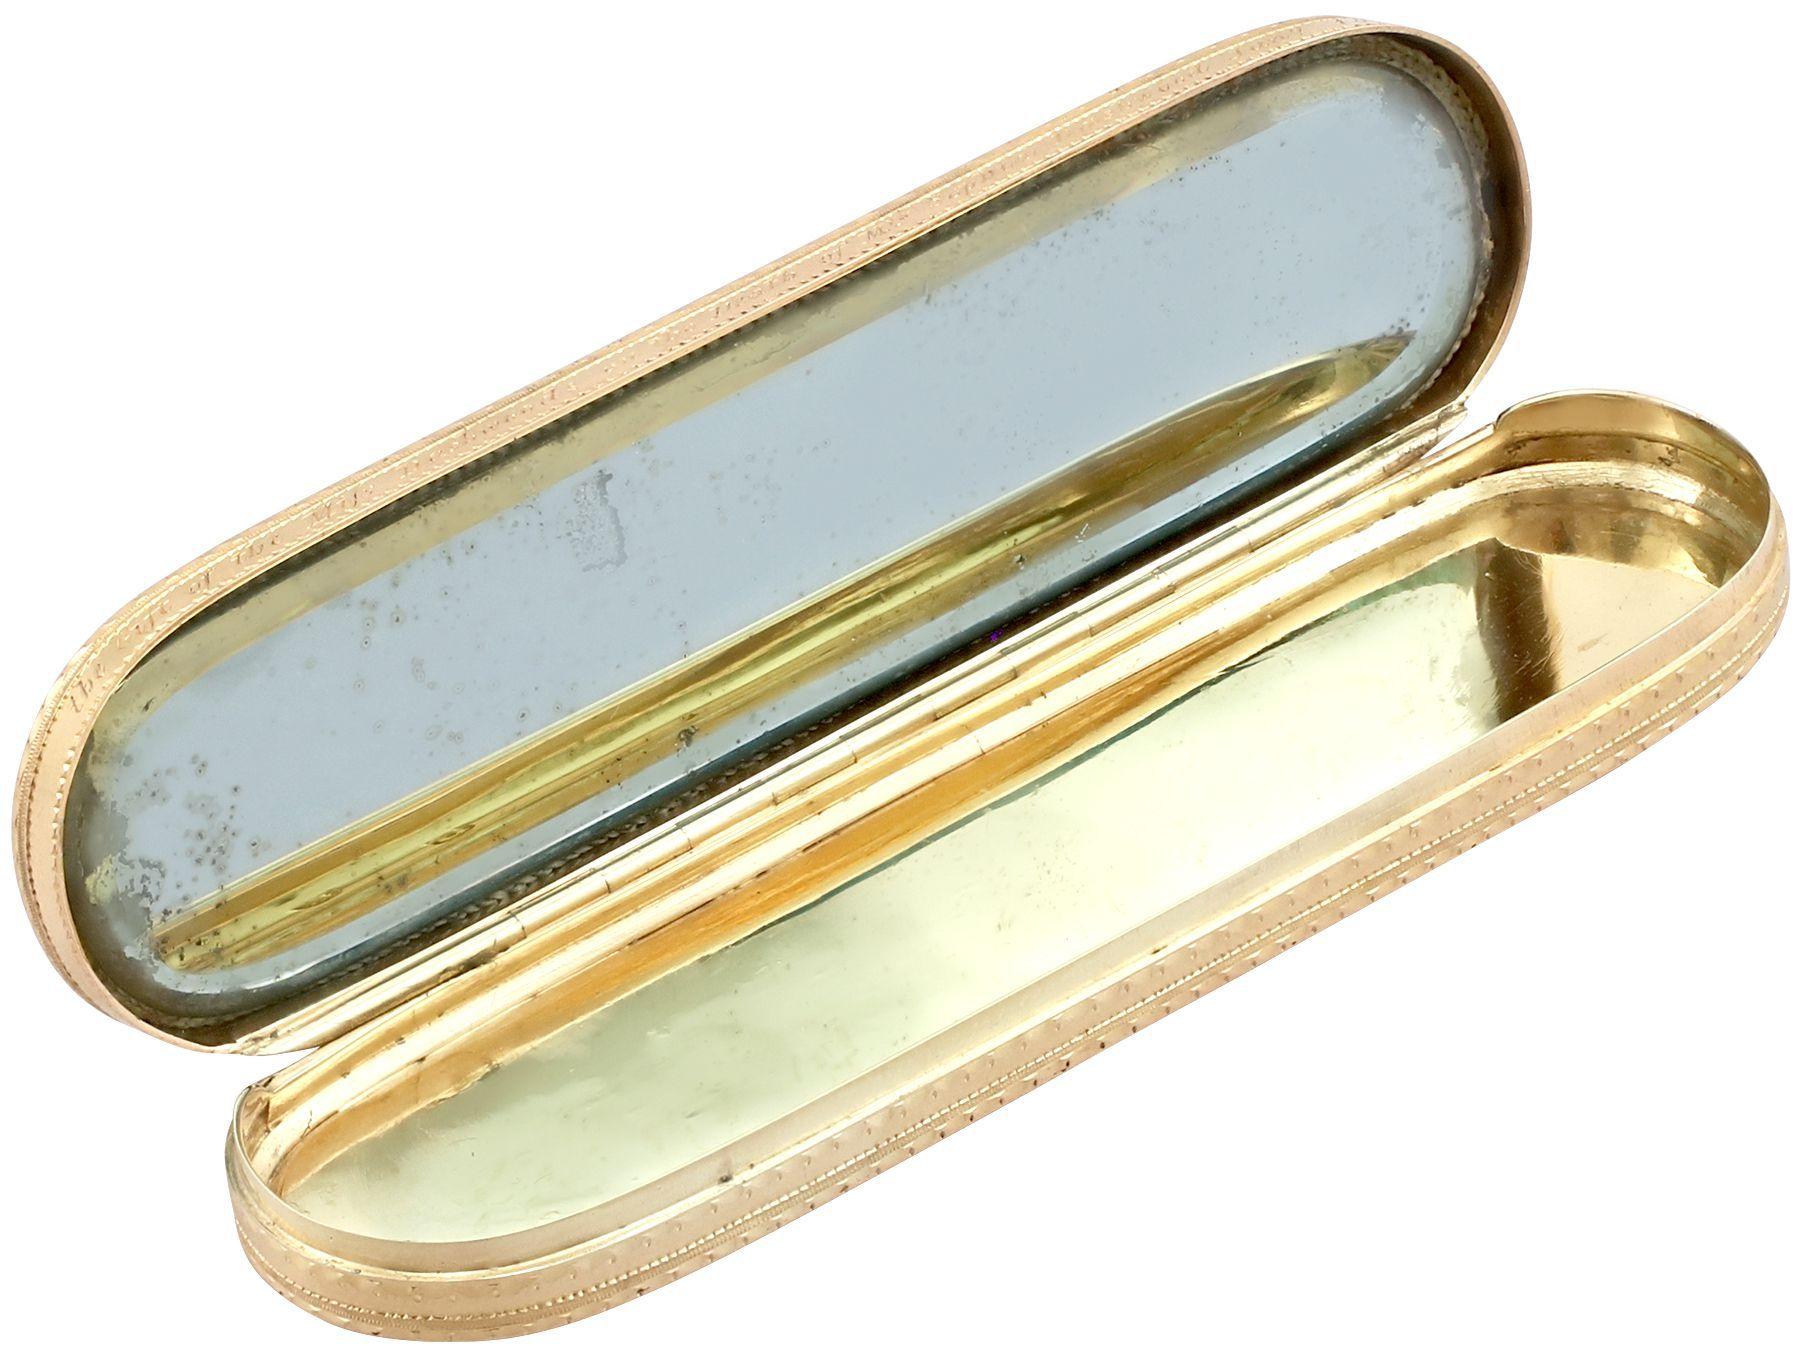 Antique George III Yellow Gold Toothpick Case / Holder with Mirror In Excellent Condition For Sale In Jesmond, Newcastle Upon Tyne